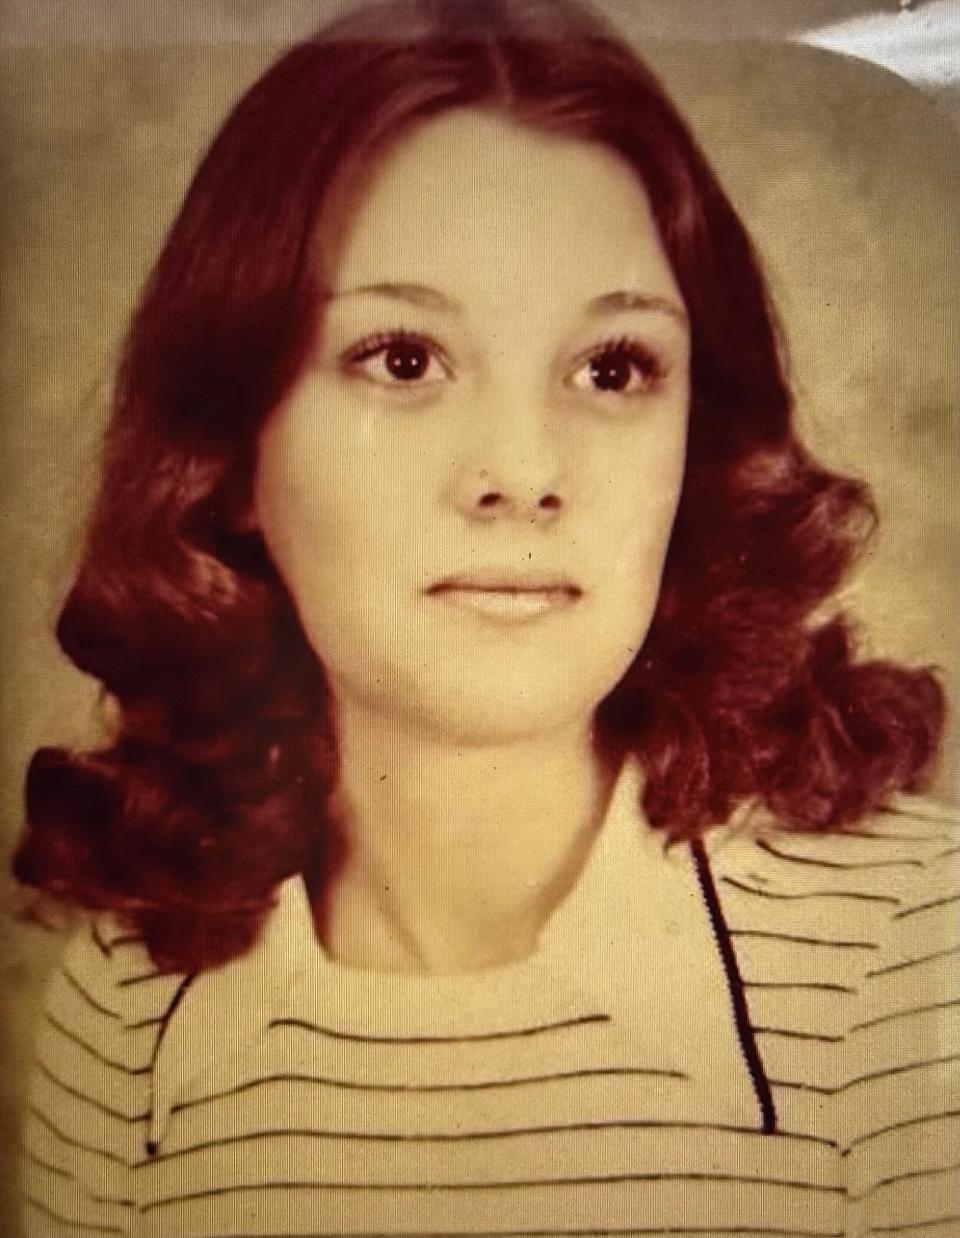 The remains of Roberta "Bobbie" Lynn Weber were recently identified using genetic genealogy more than 30 years after they were found, the Volusia Sheriff's Office stated.